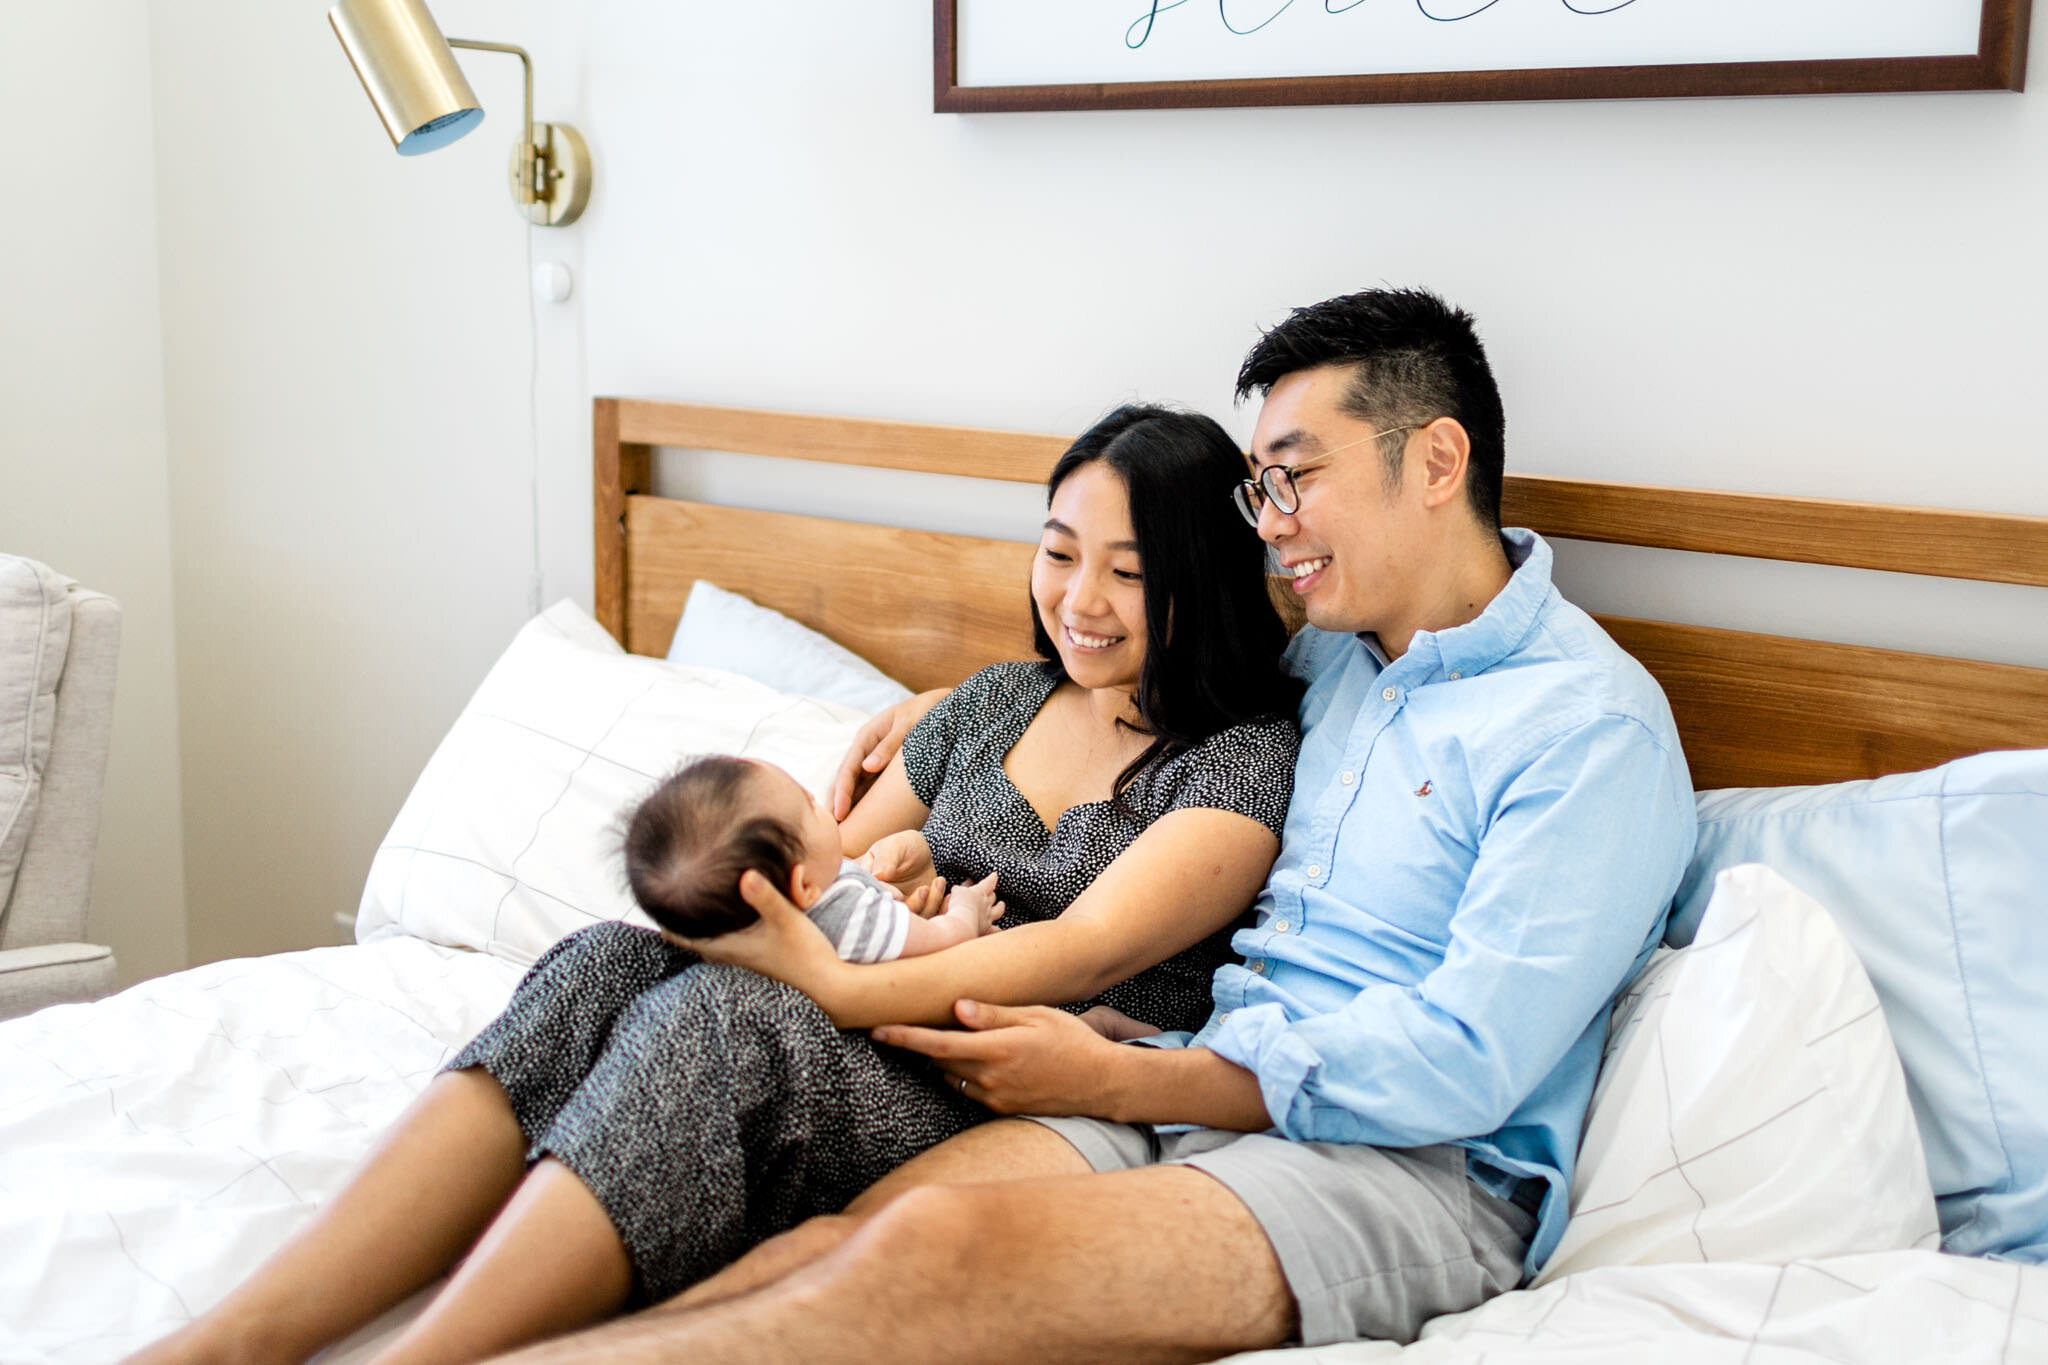 Raleigh Newborn Photographer | By G. Lin Photography | Beautiful natural light lifestyle newborn session at home